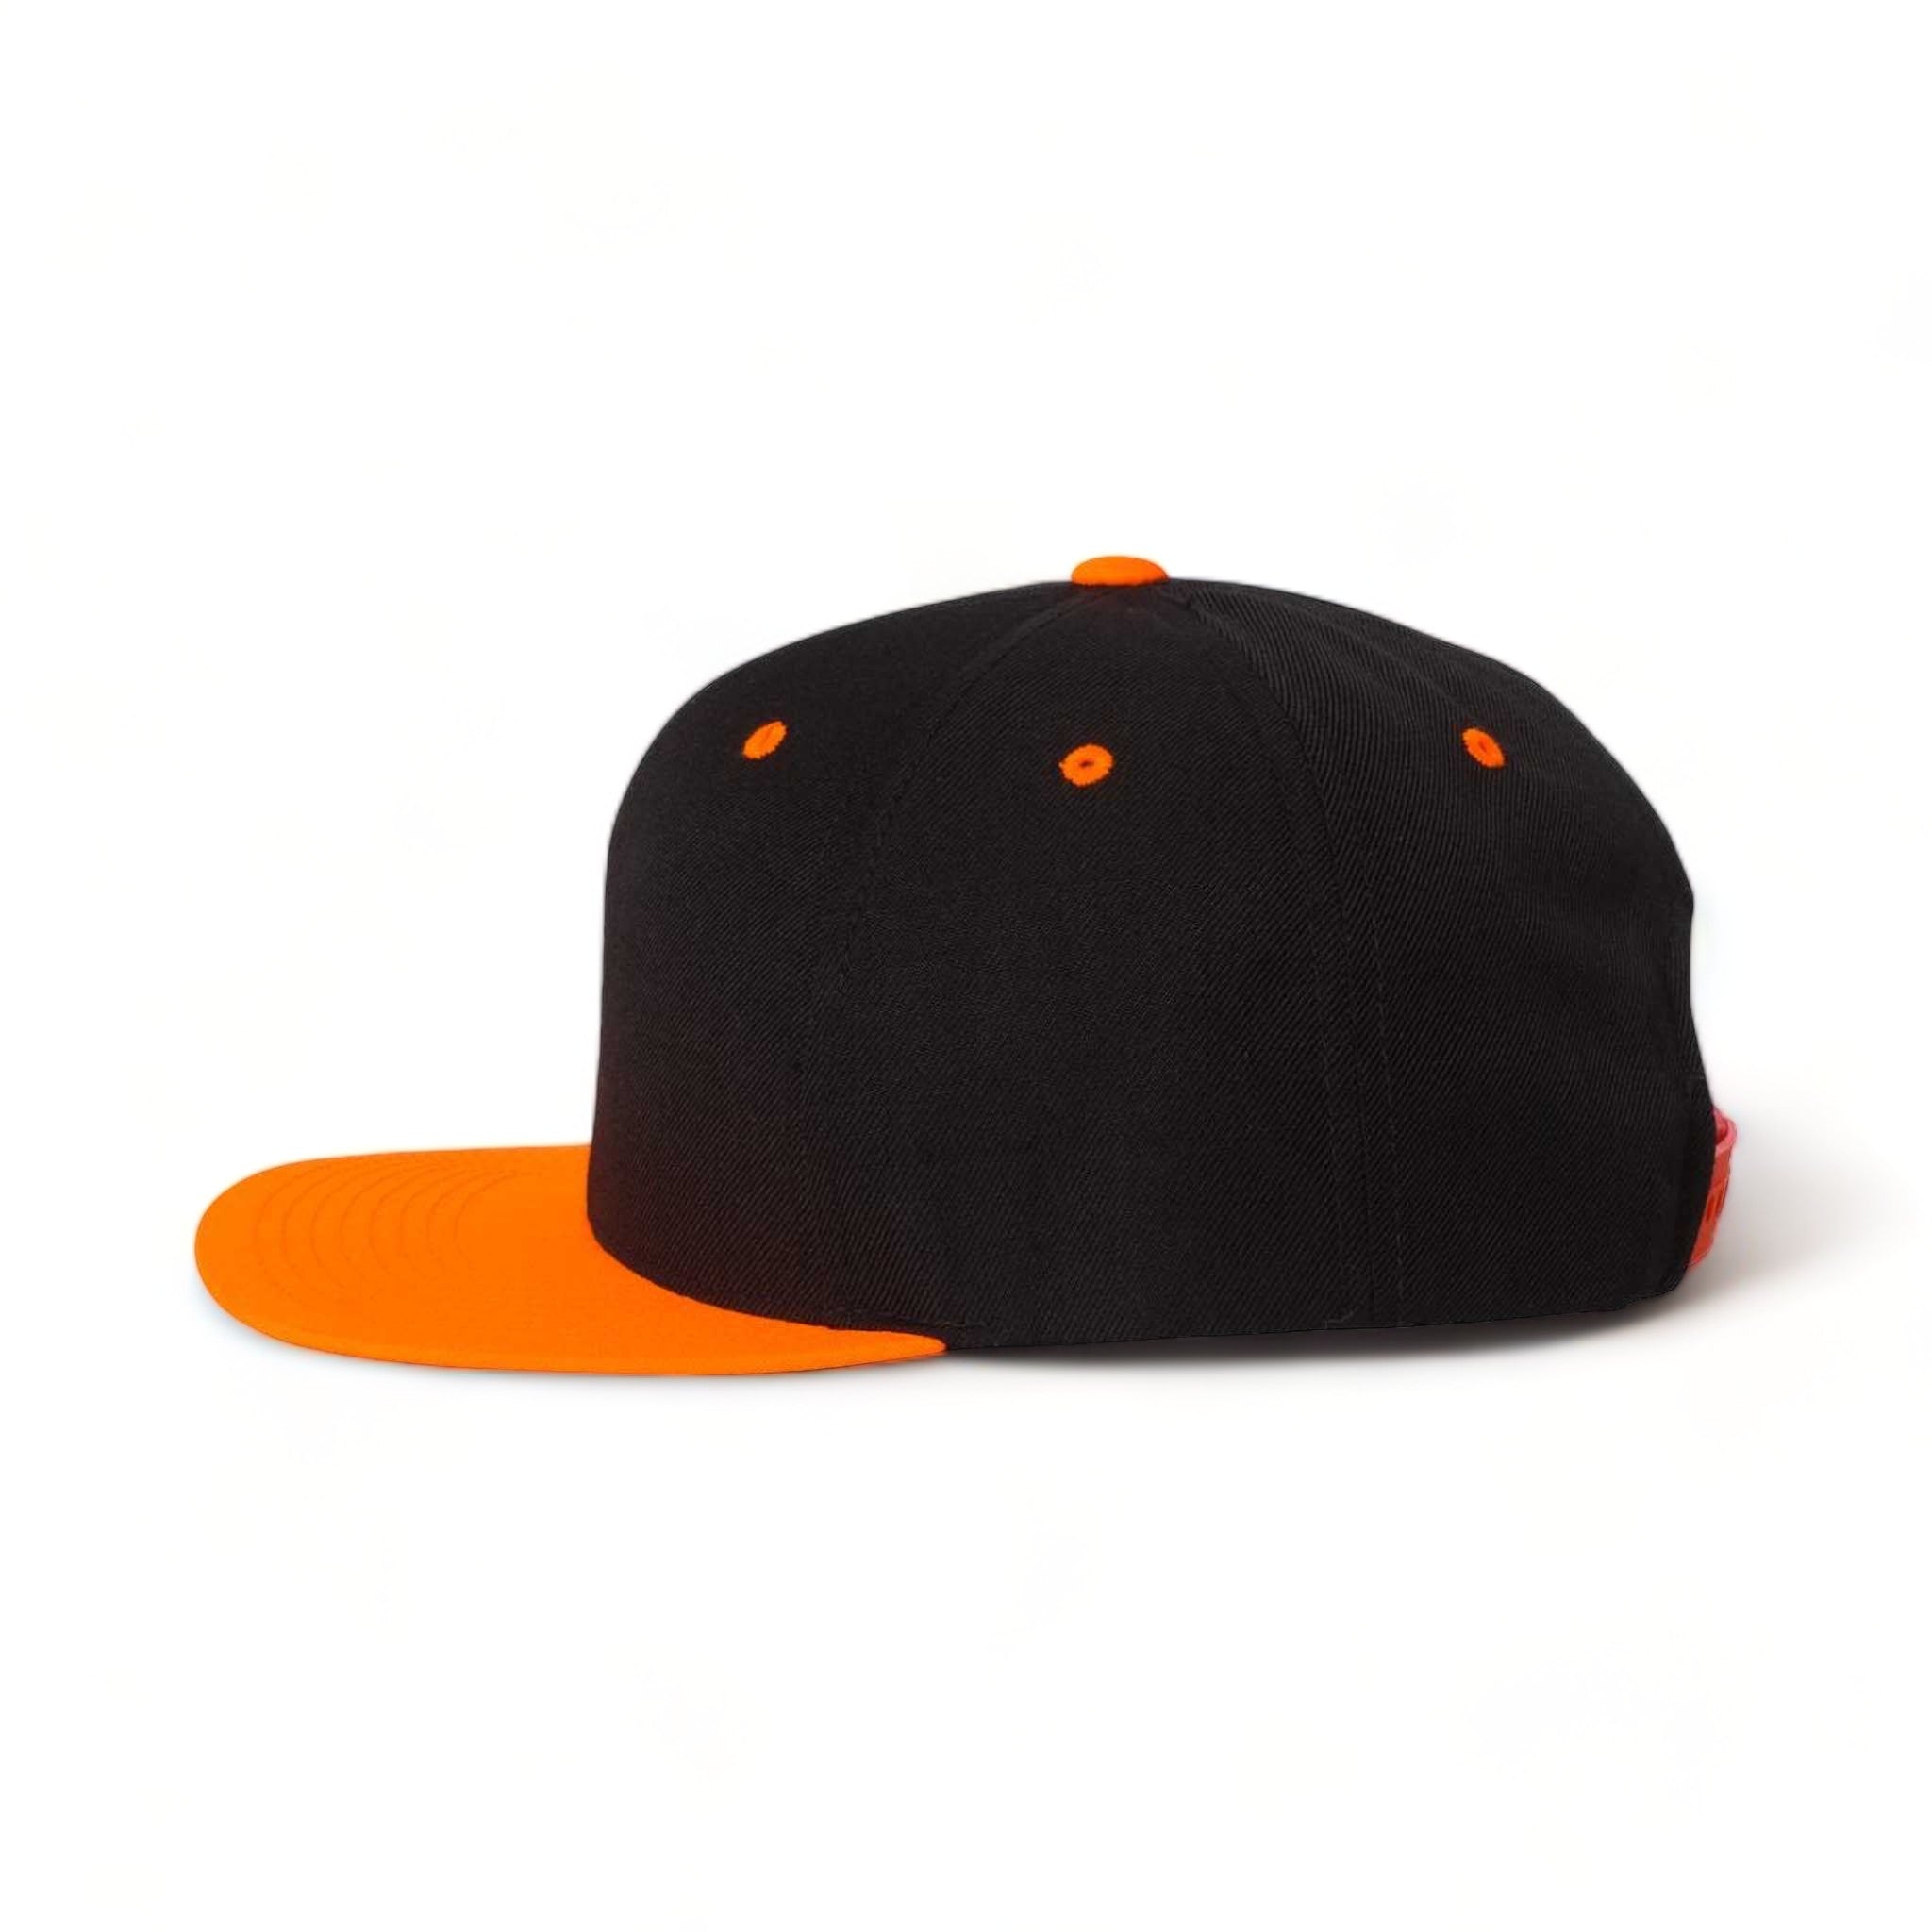 Side view of YP Classics 6089M custom hat in black and neon orange